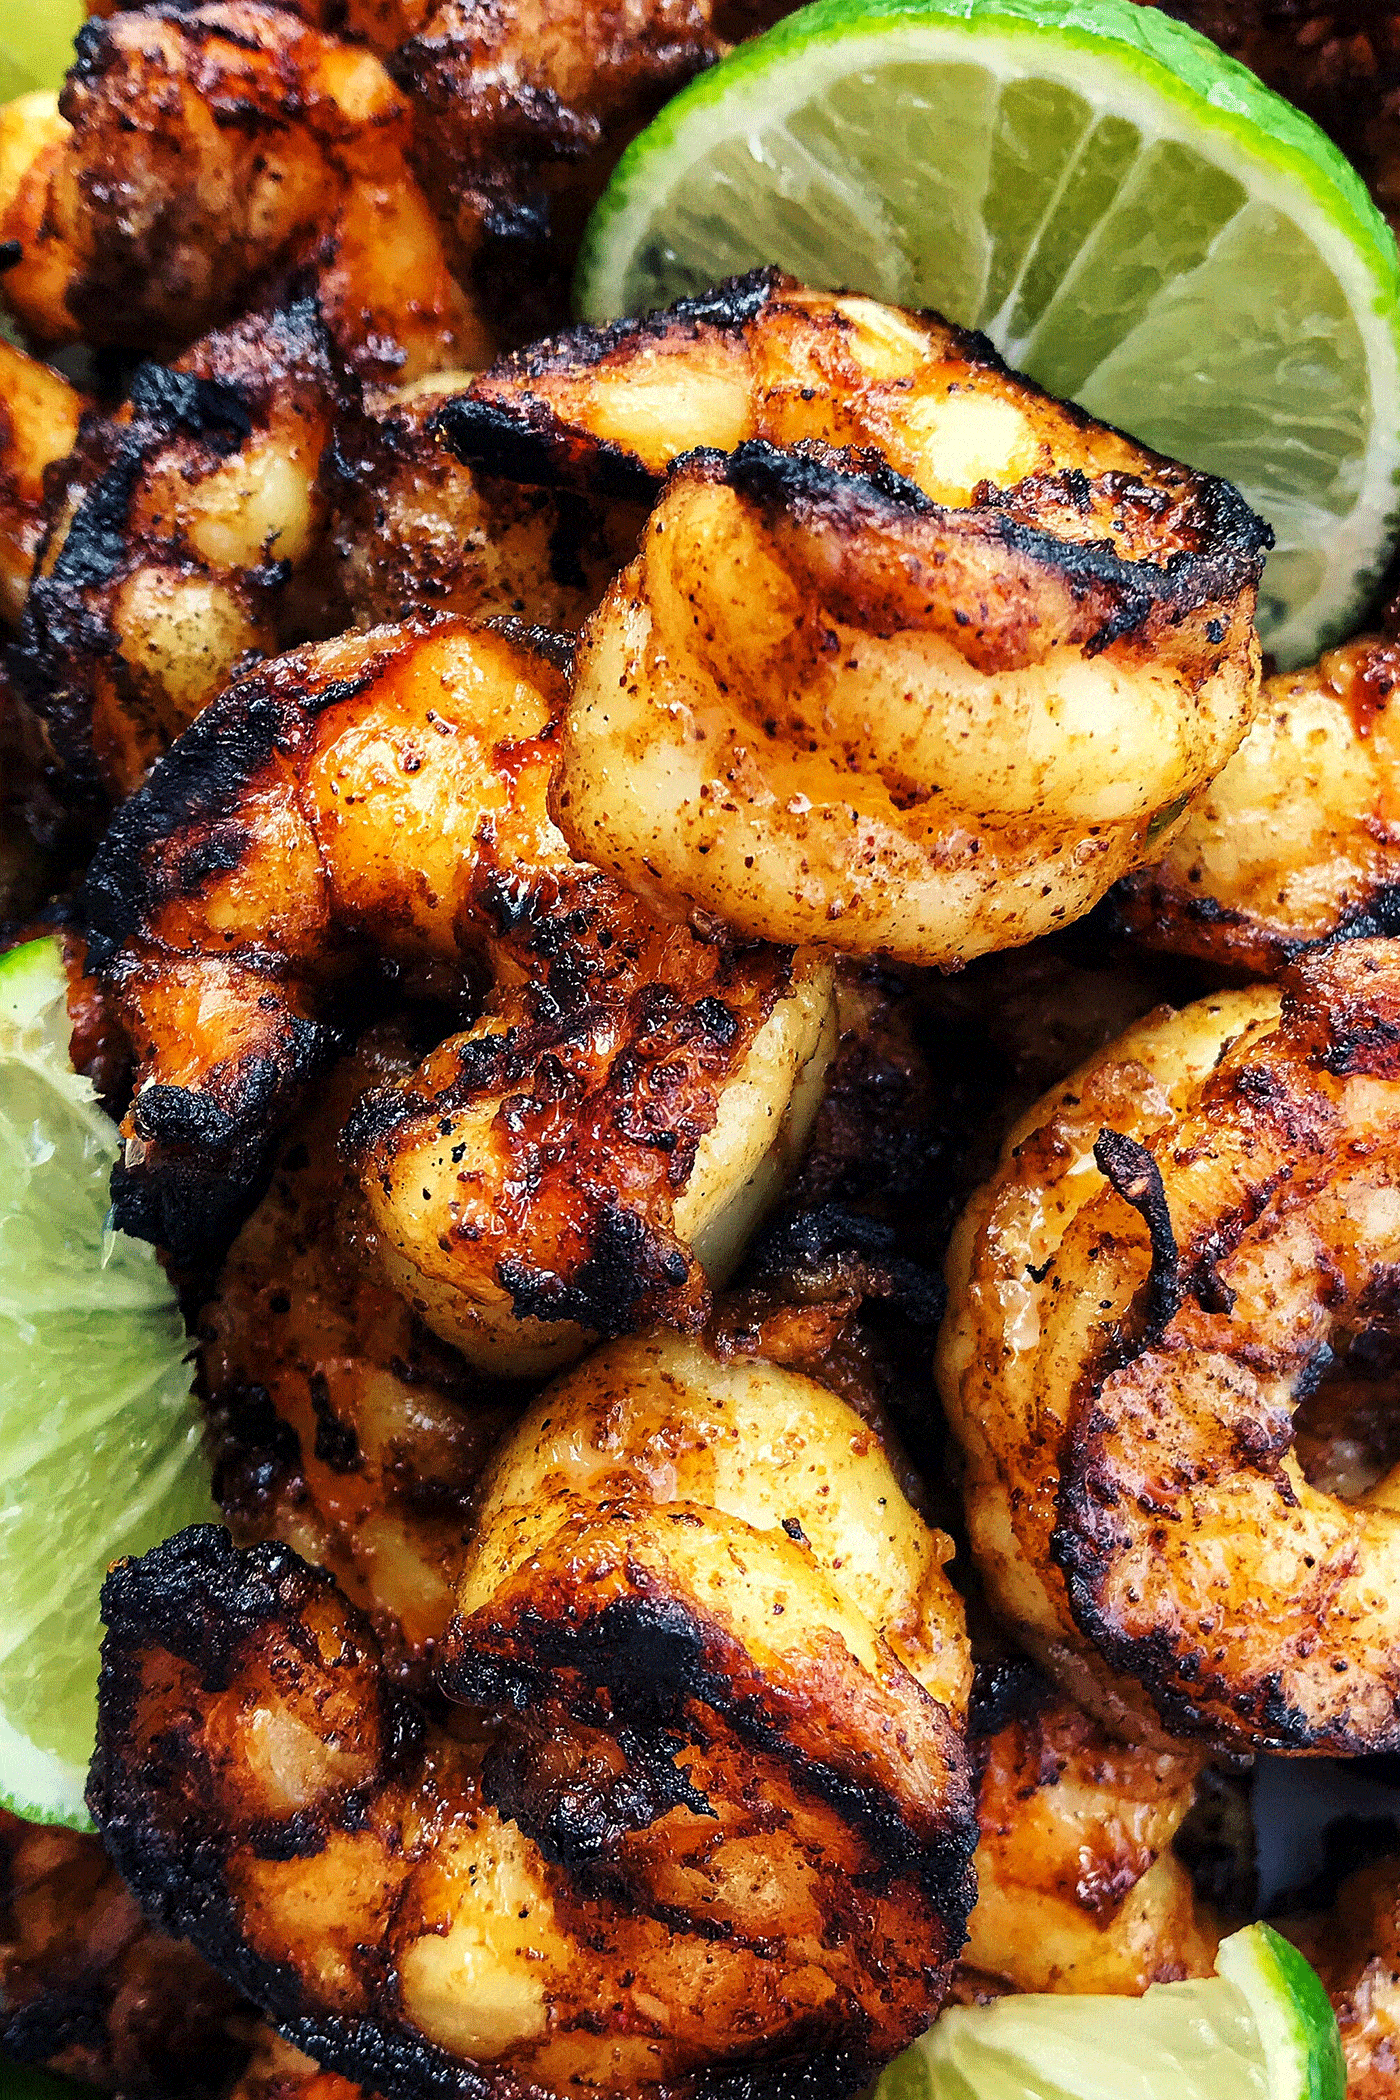 Jumbo shrimp that is charred from grill, with fresh lime wedges.